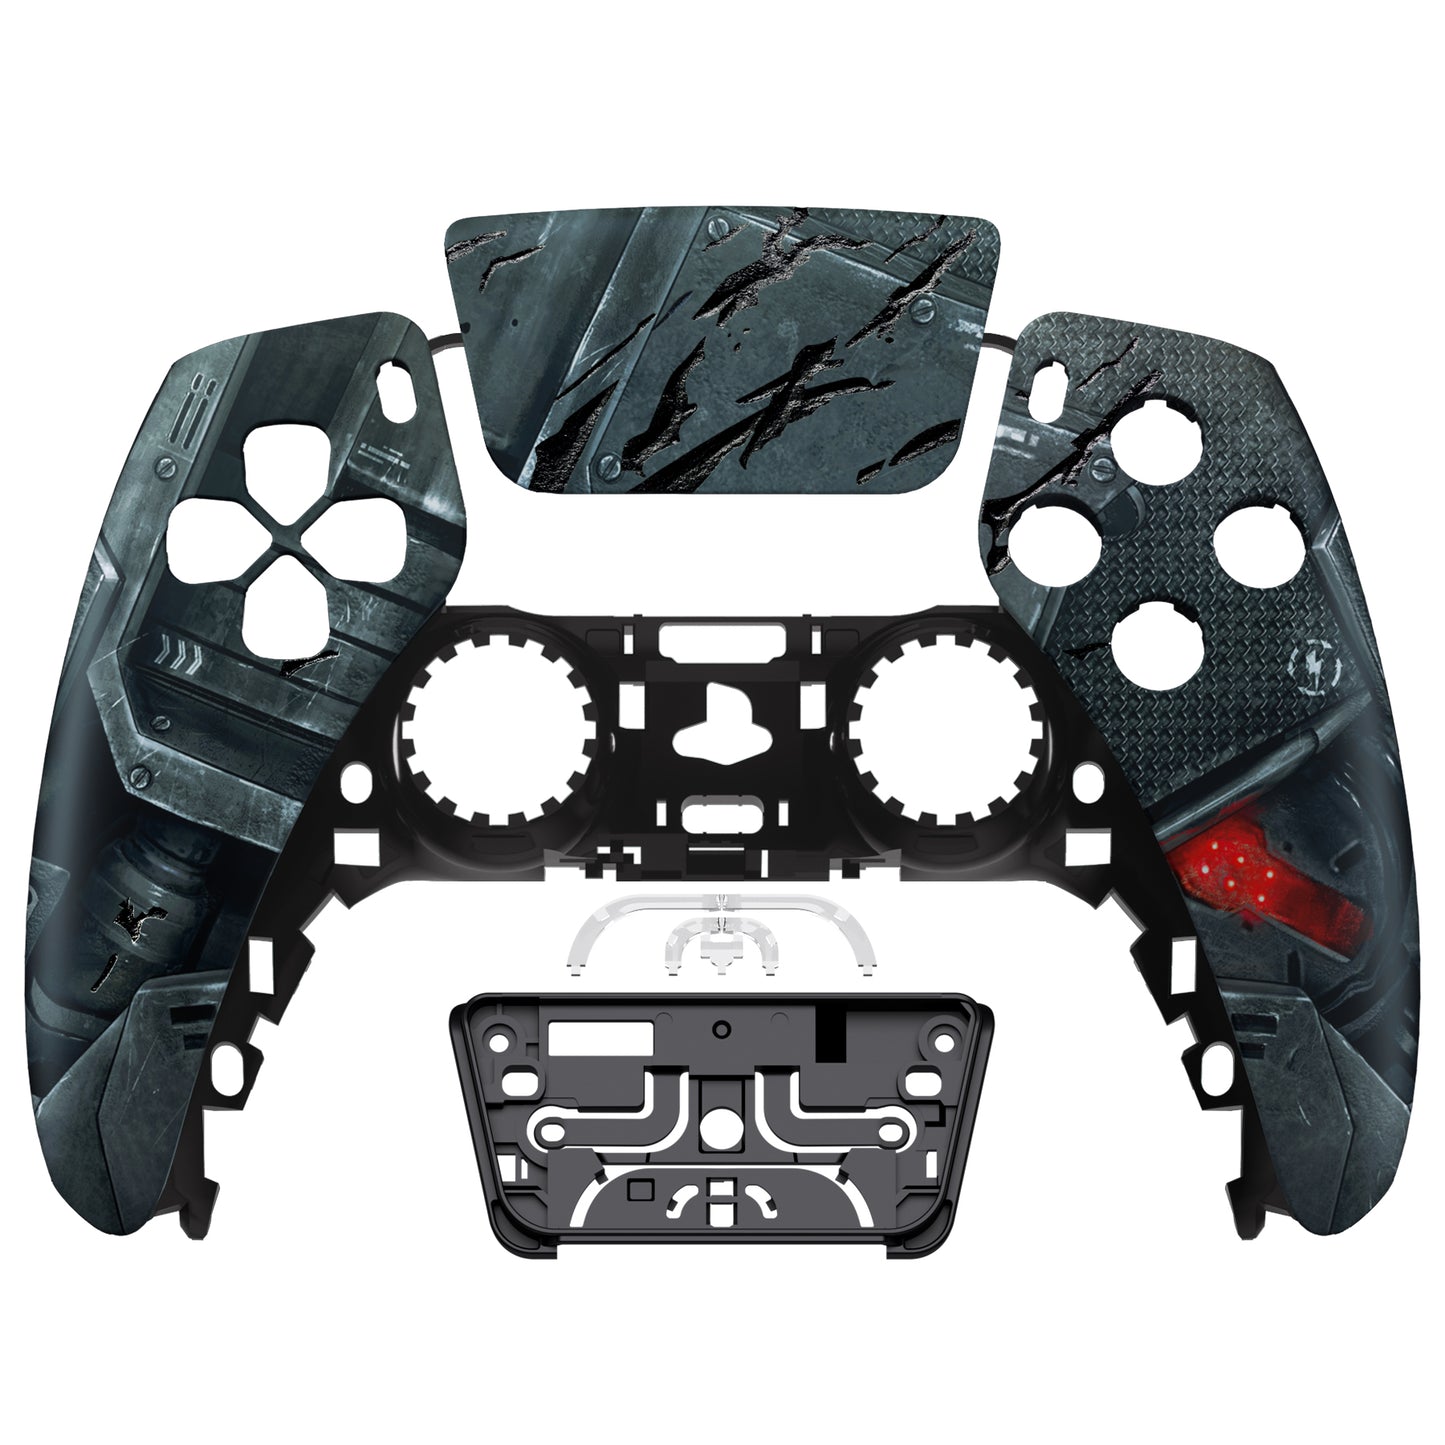 eXtremeRate Replacement Front Housing Shell with Touchpad Compatible with PS5 Controller BDM-010/020/030/040 - Mecha Armor with Combat Damage Engrave eXtremeRate